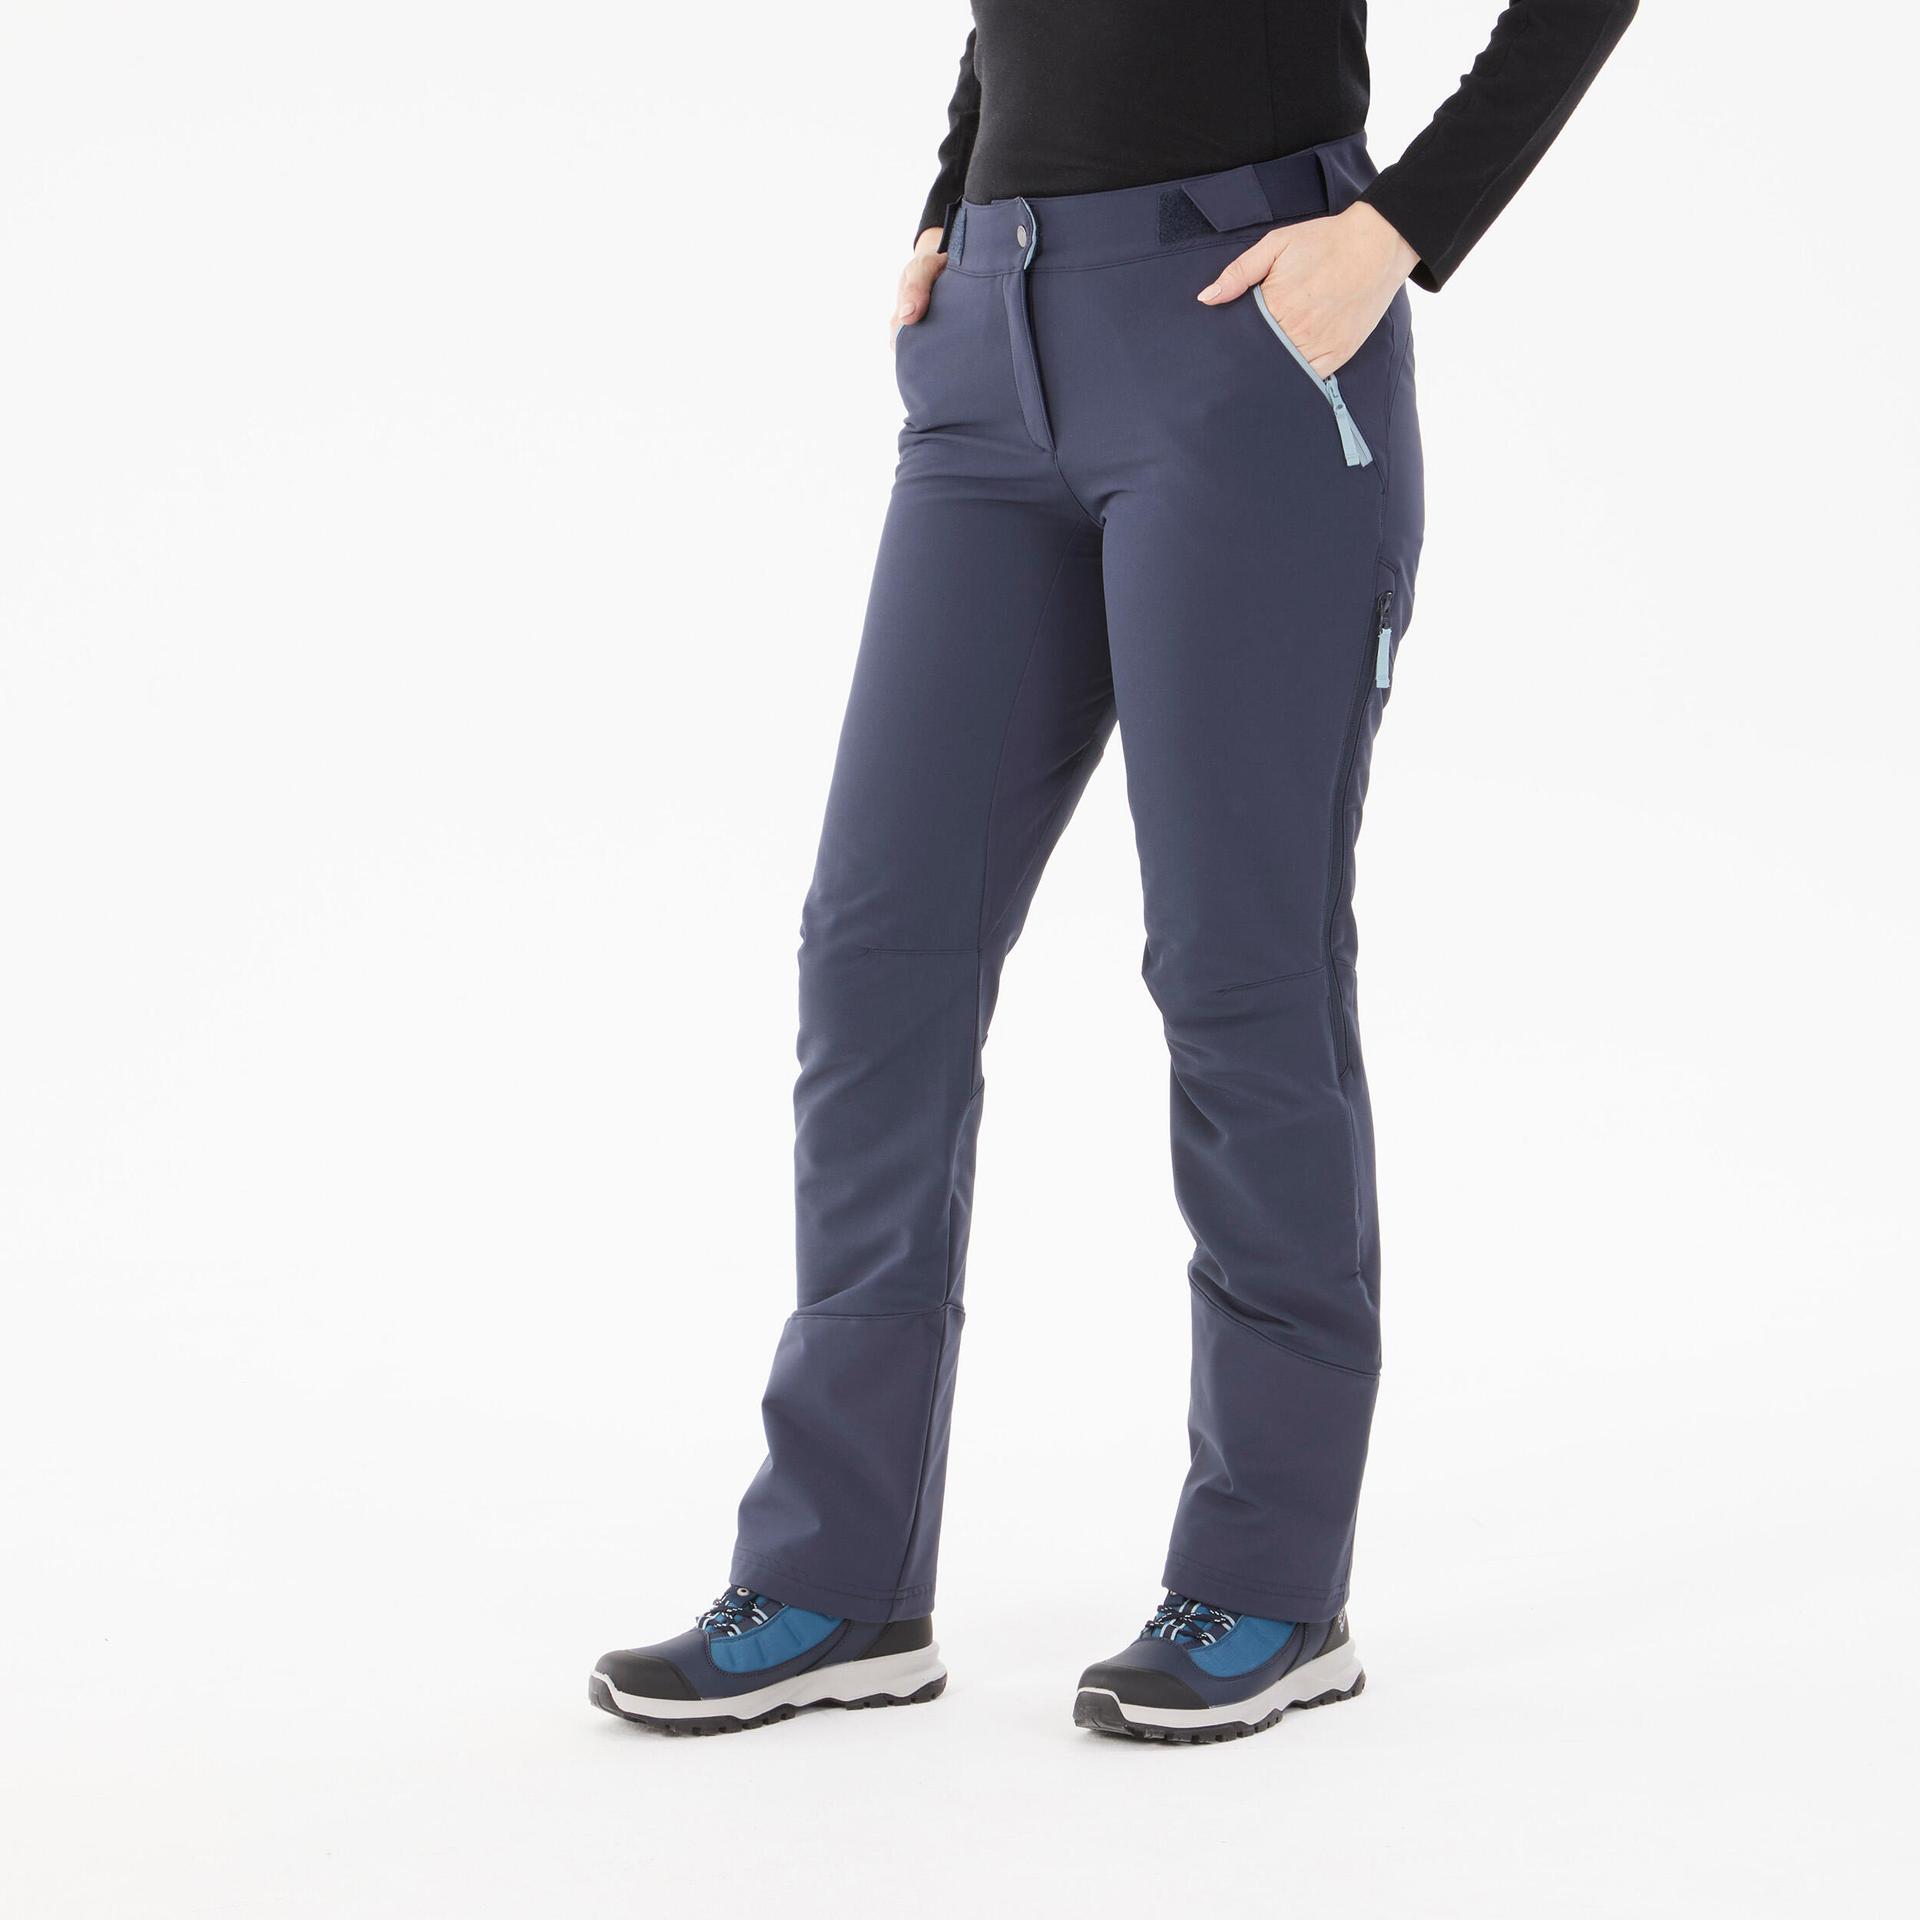 women's warm water-repellent ventilated hiking trousers - sh500 mountain ventil